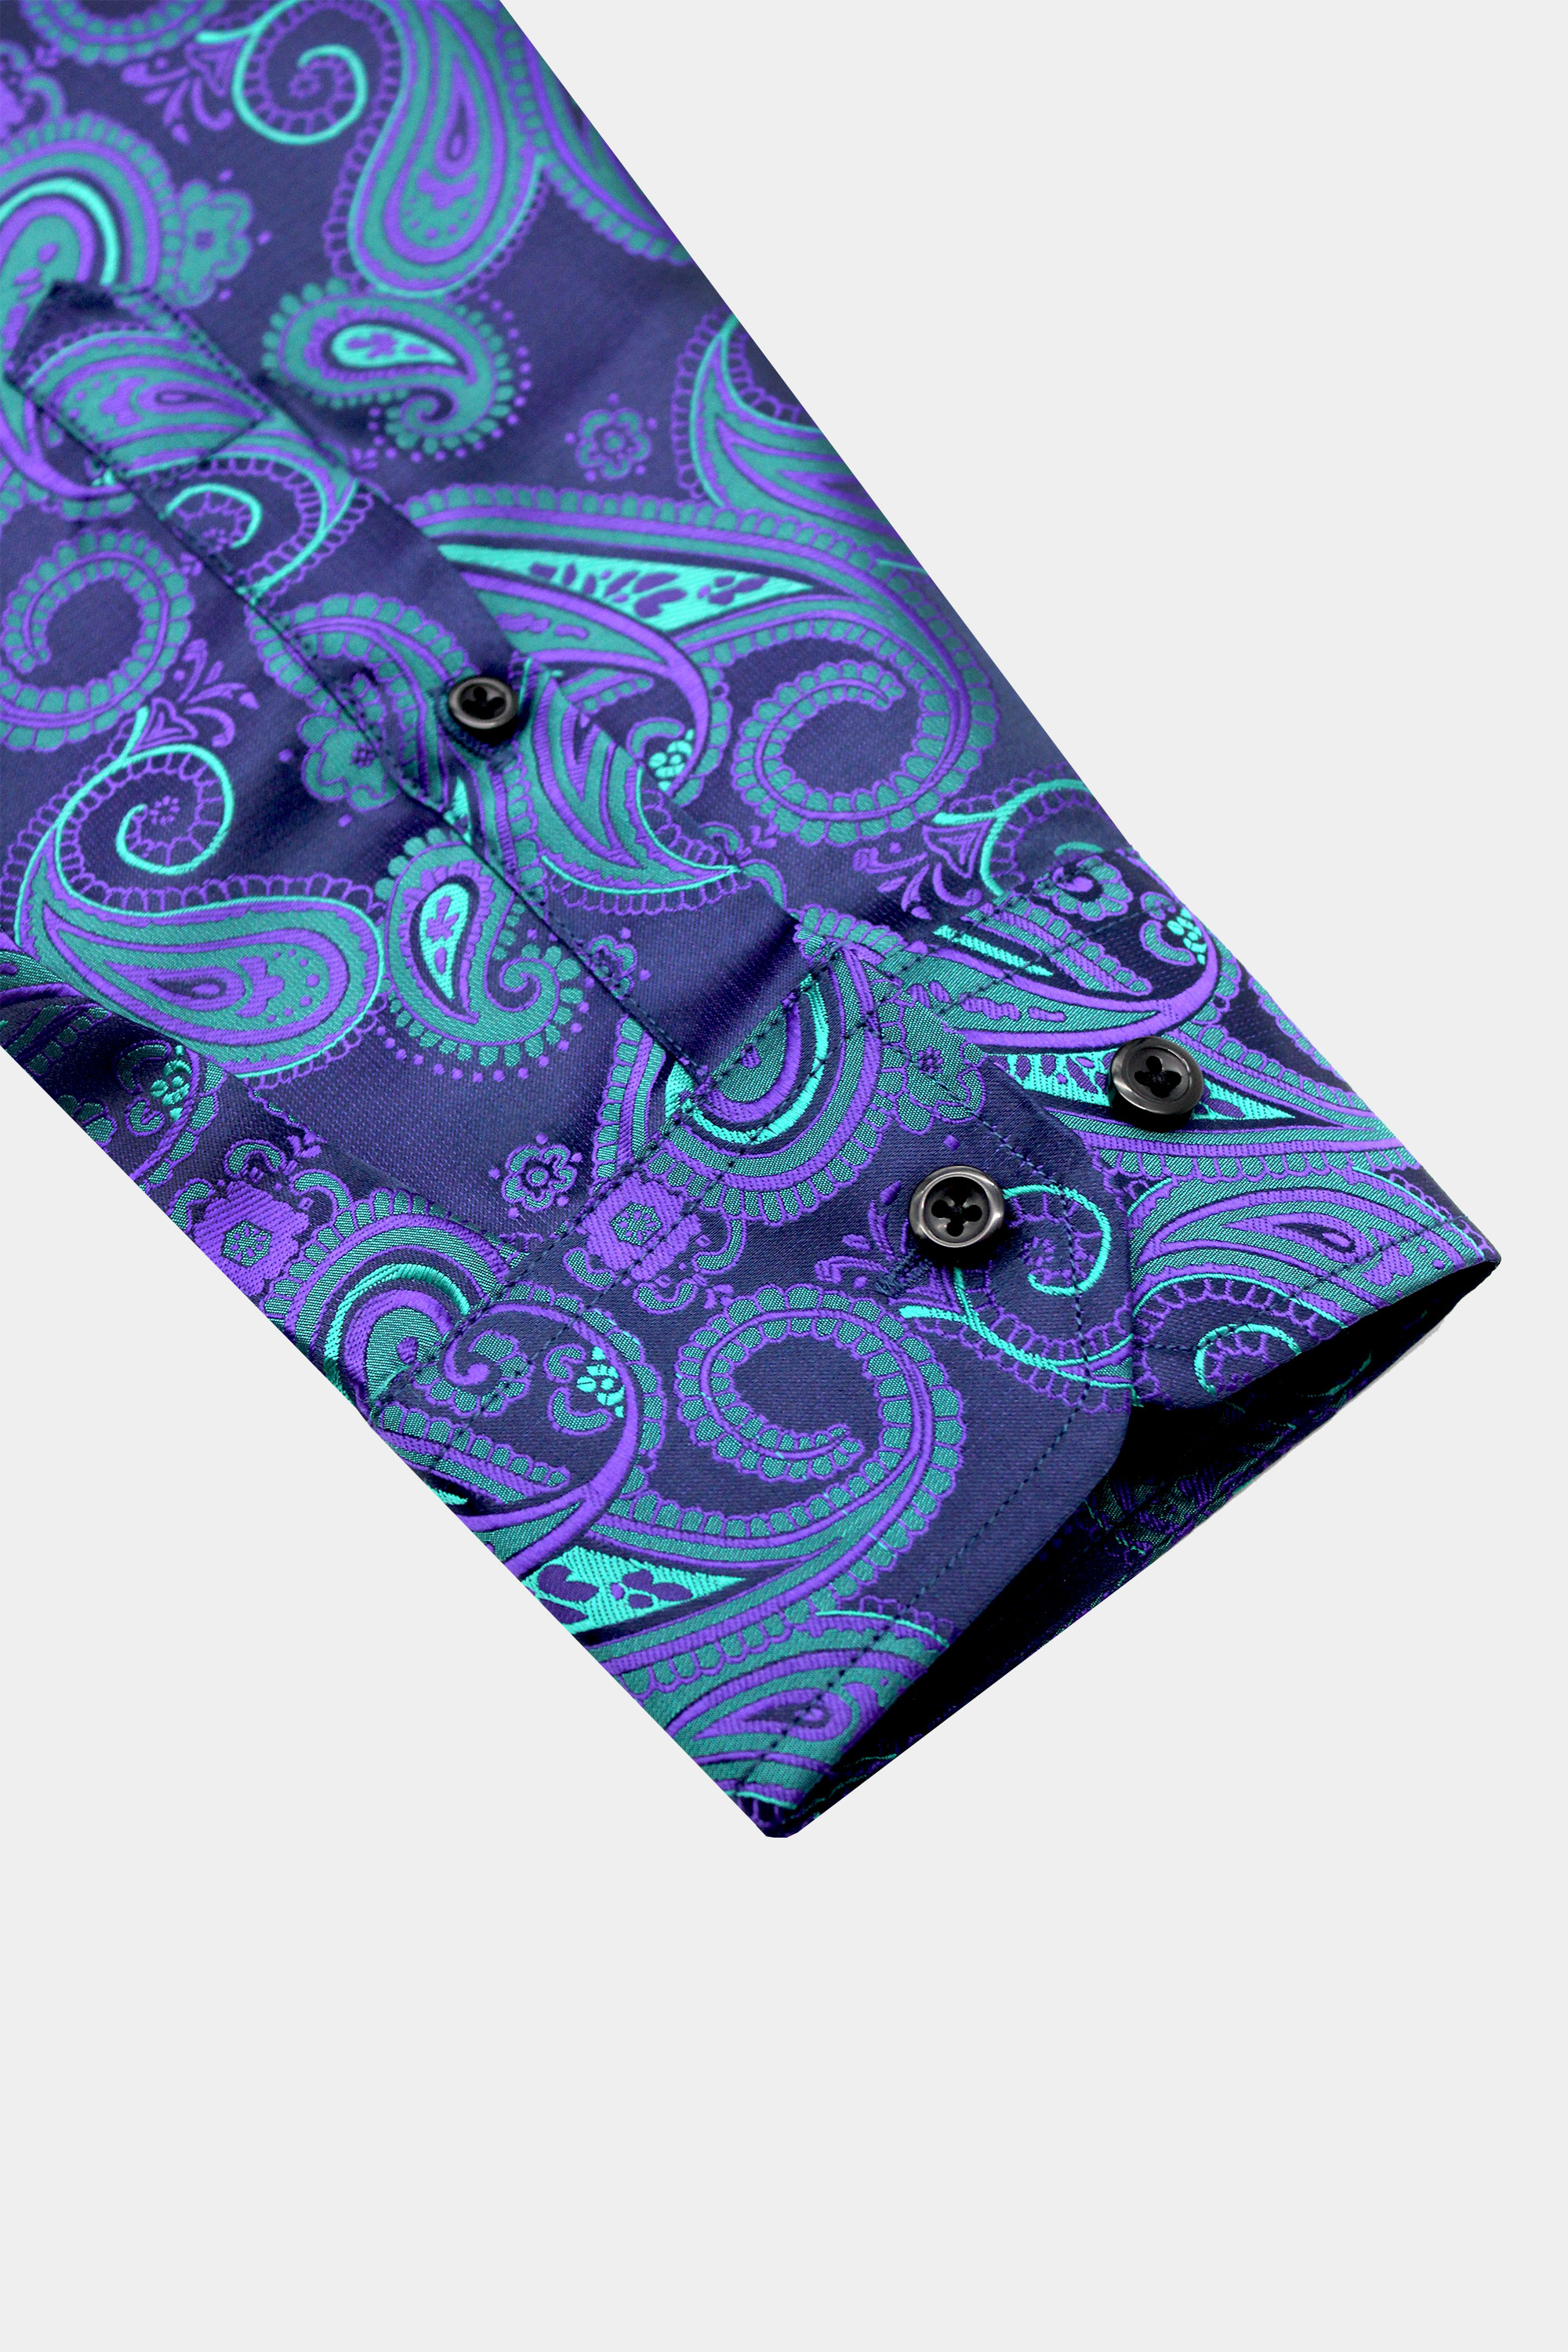 Mens-Floral-Purple-and-Turquoise-Dress-Shirt-from-Gentlem